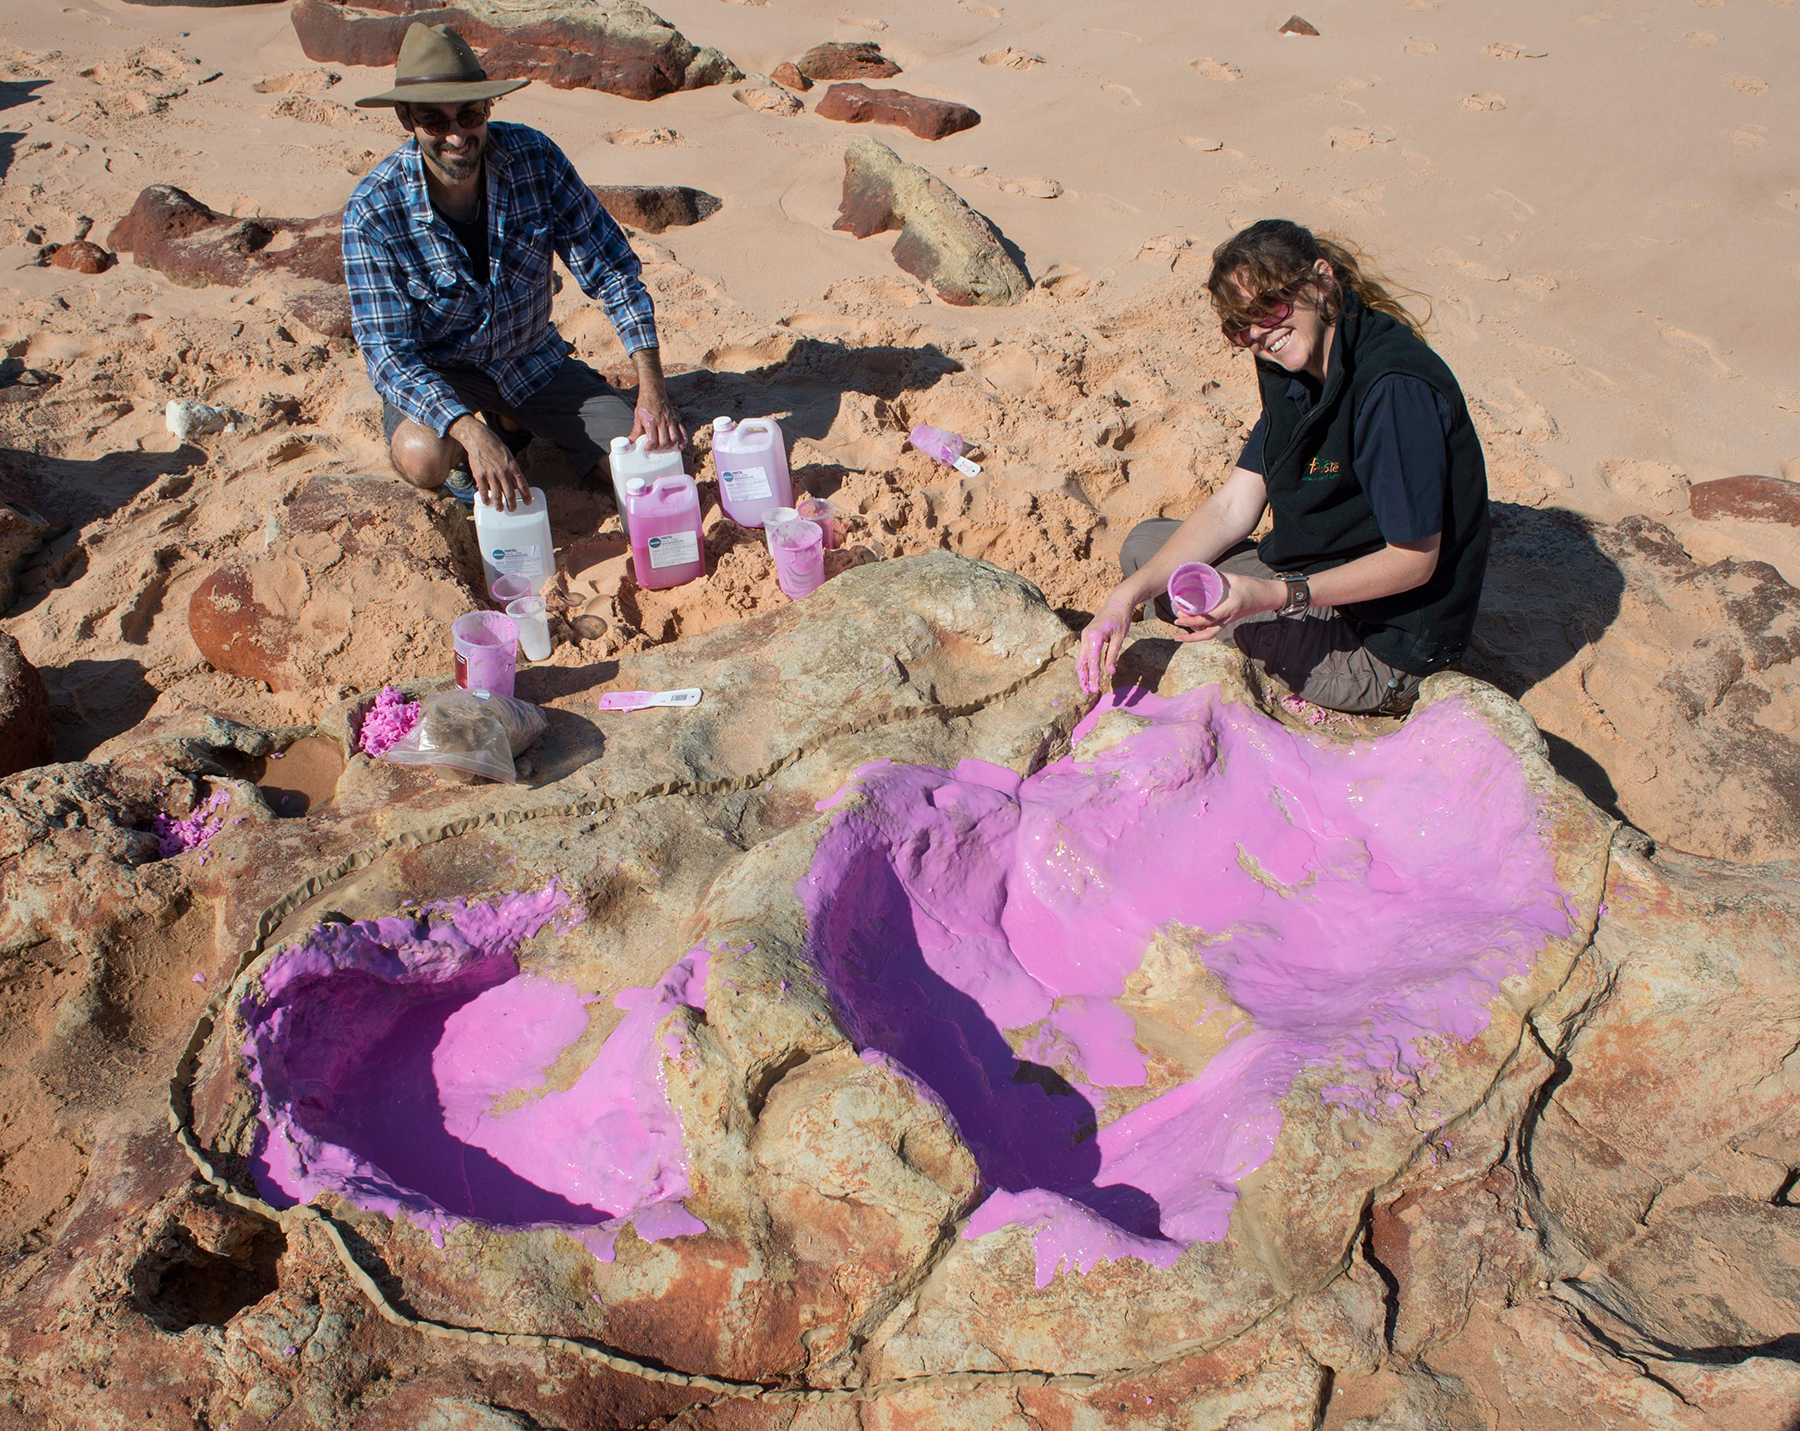 PHOTO: Dr Anthony Romilio and Linda Pollard from the University of Queensland creating a silicon cast of sauropod tracks in the Lower Cretaceous Broome Sandstone in the Walmadany area of Dampier Peninsula, Western Australia.